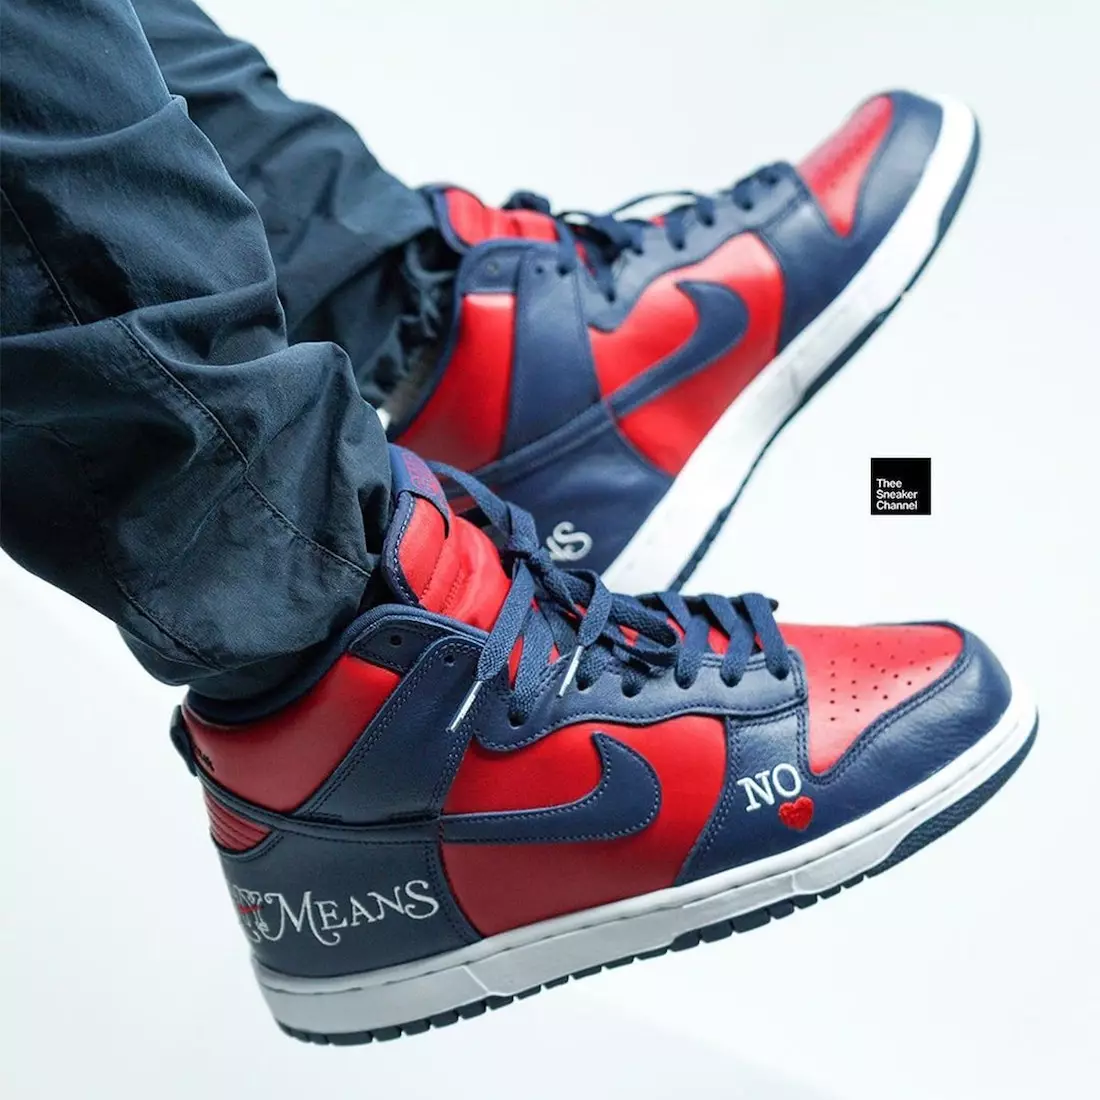 Super Nike SB Dunk High By Any Red Navy On-Feet